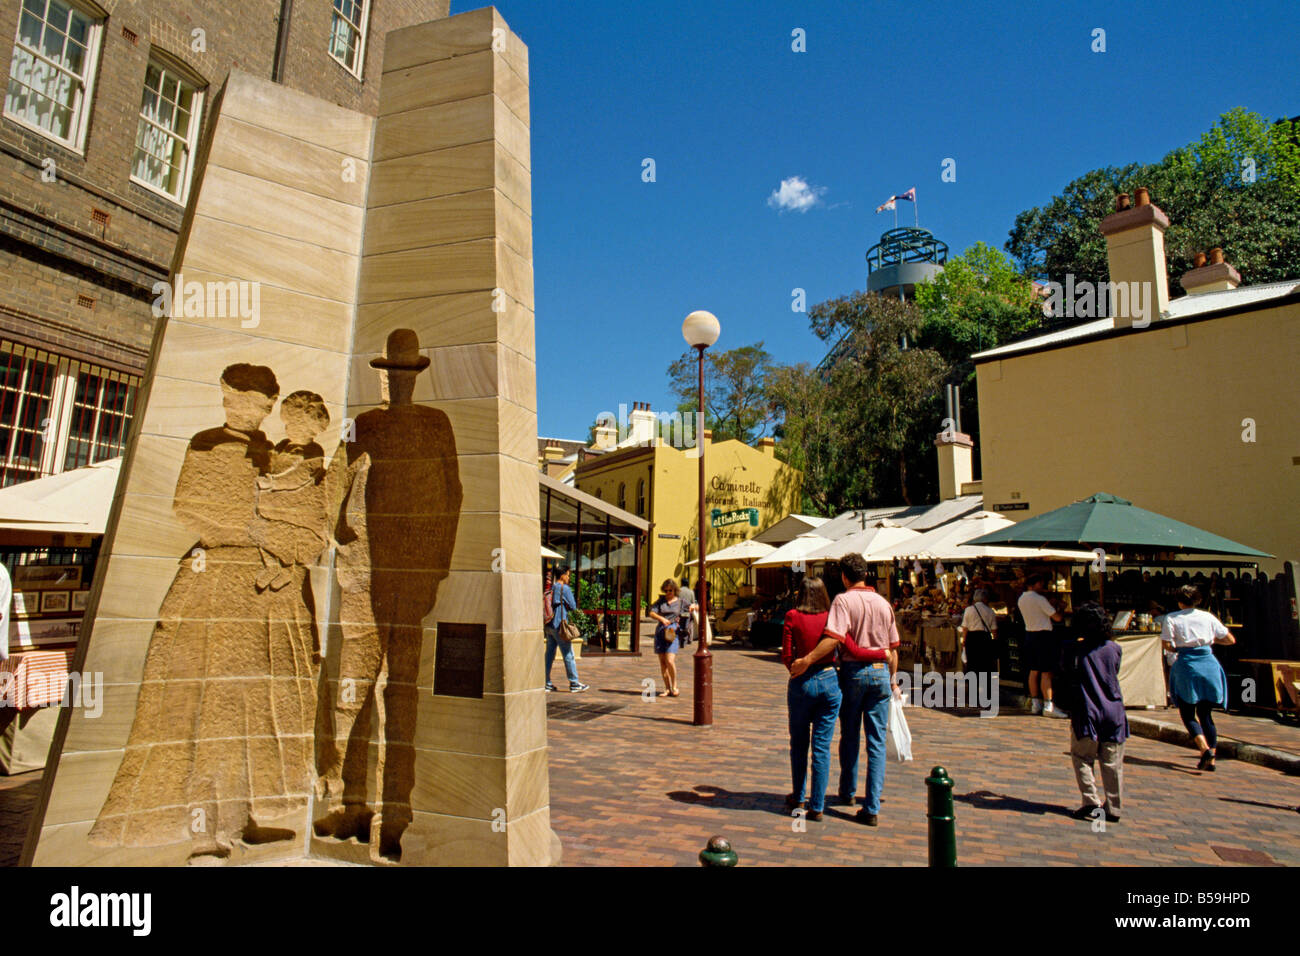 Silhouette sculpture in a square in The Rocks area Sydney New South Wales Australia Pacific Stock Photo